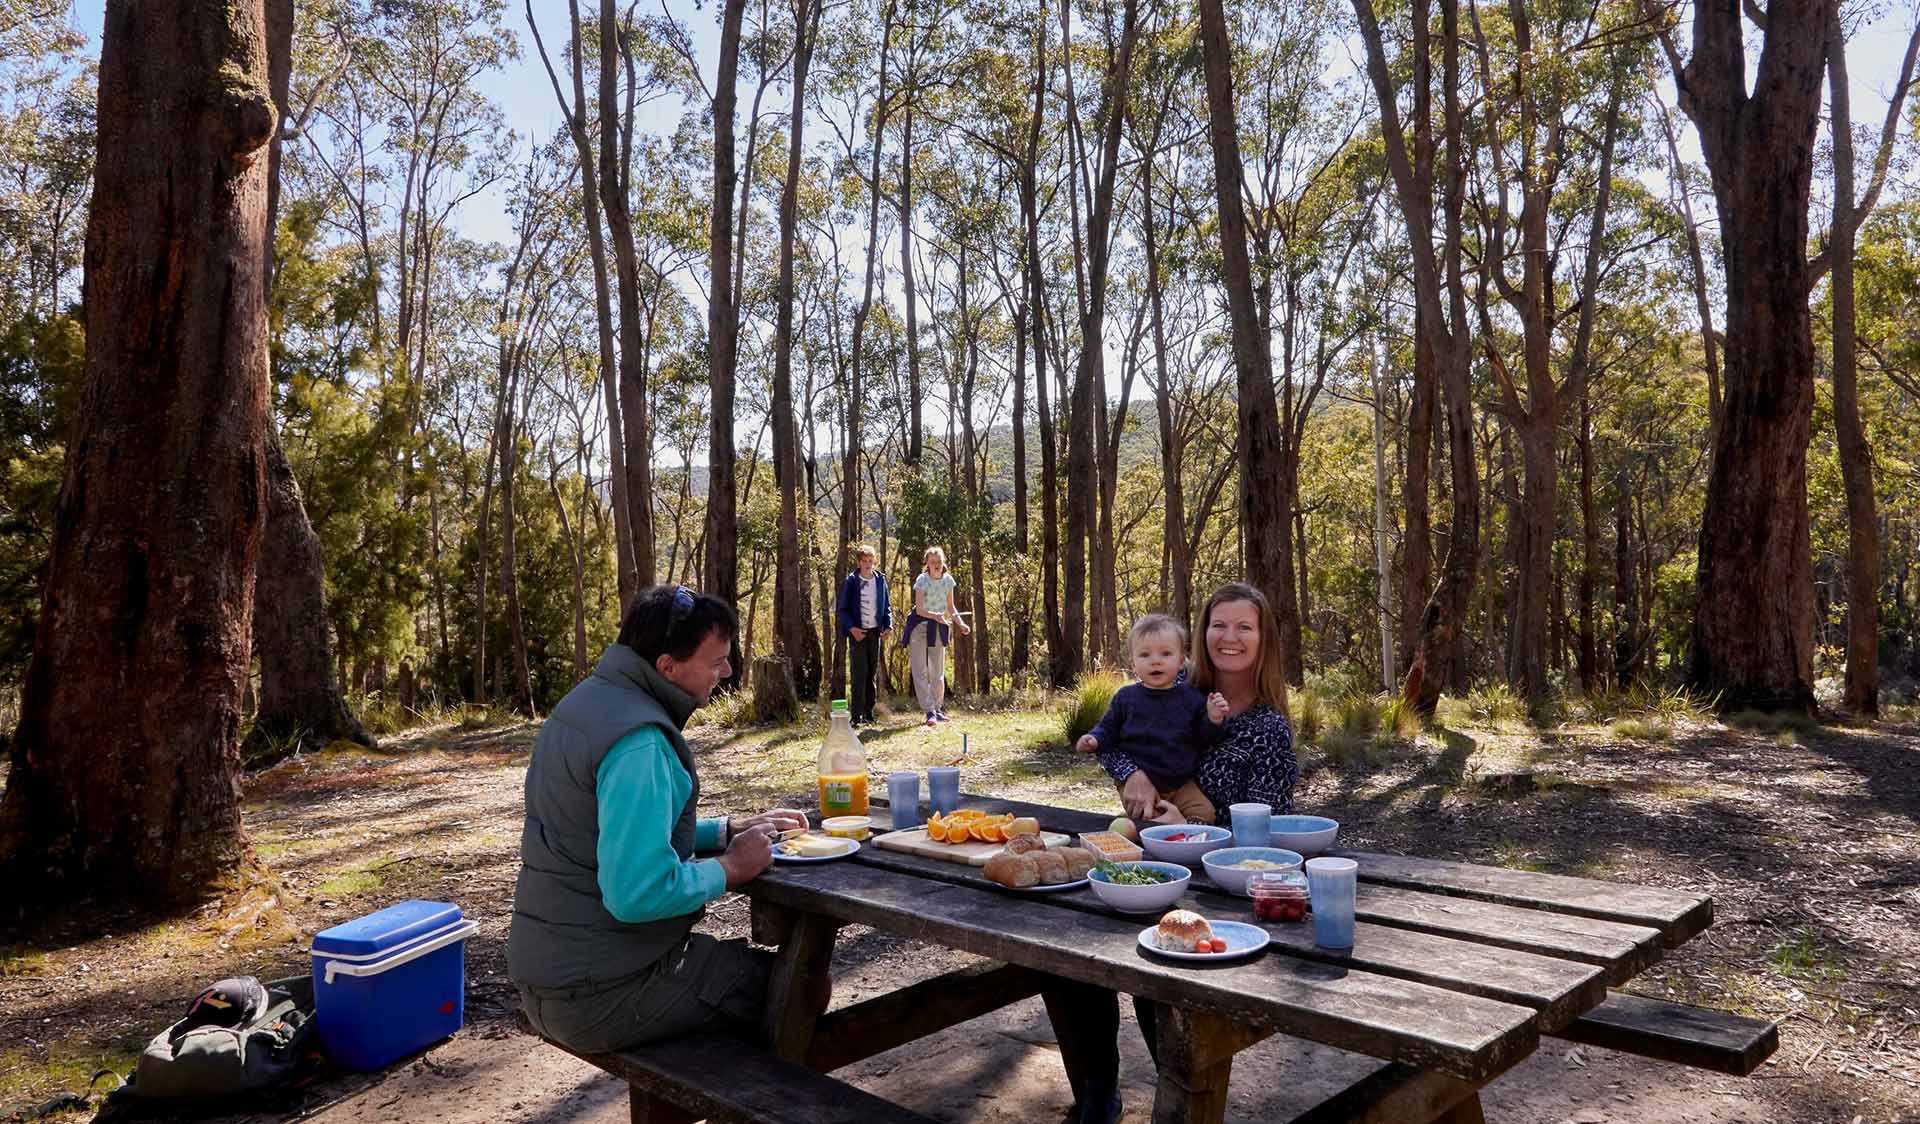 A family stops for lunch at MacKenzie's Flat Picnic Area